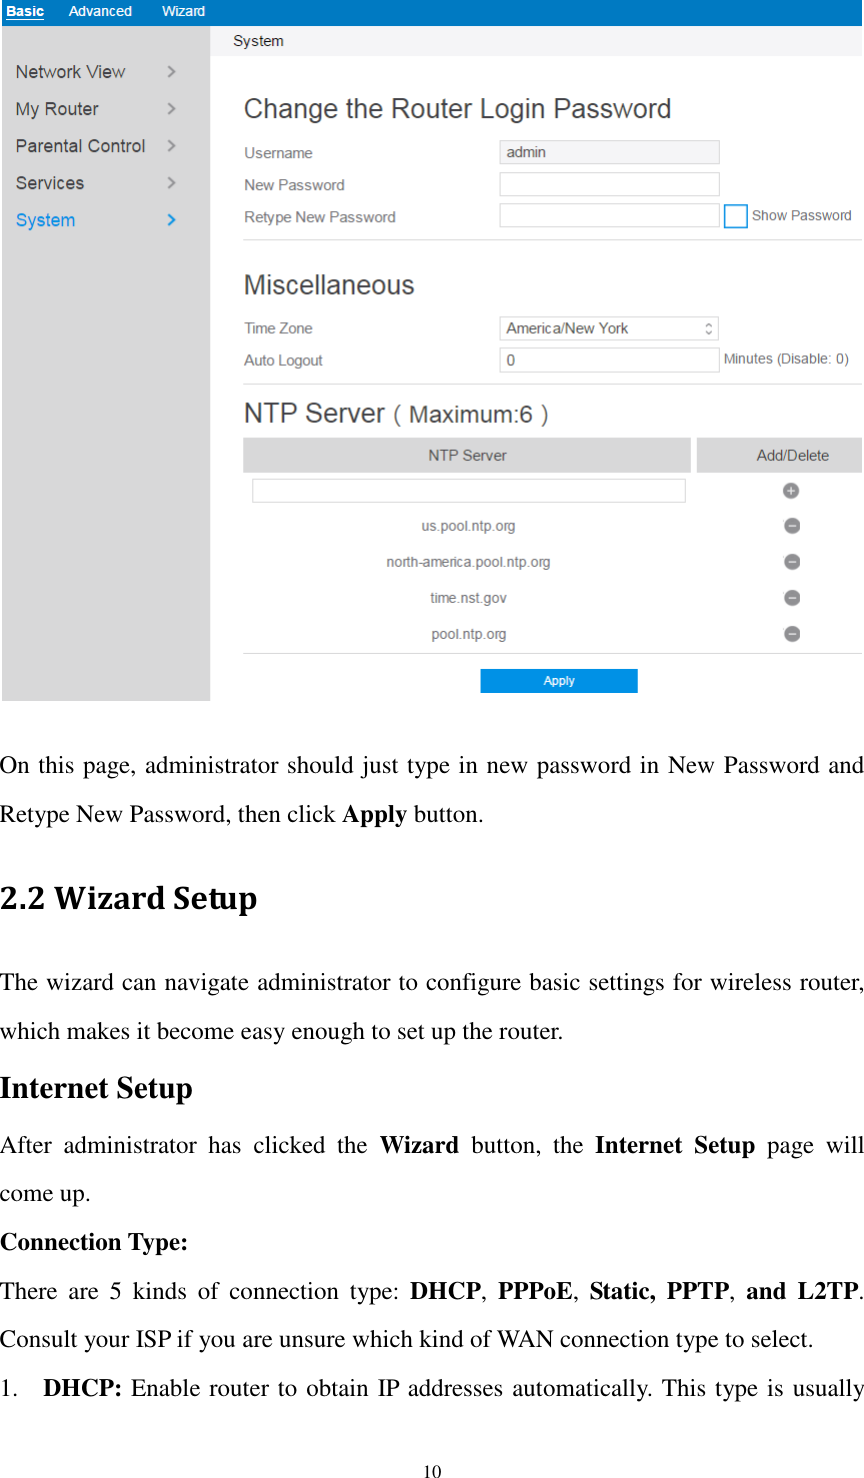  10   On this page, administrator should just type in new password in New Password and Retype New Password, then click Apply button. 2.2 Wizard Setup The wizard can navigate administrator to configure basic settings for wireless router, which makes it become easy enough to set up the router. Internet Setup After  administrator  has  clicked  the  Wizard  button,  the  Internet  Setup  page  will come up. Connection Type: There  are  5  kinds  of  connection  type:  DHCP,  PPPoE,  Static,  PPTP,  and  L2TP. Consult your ISP if you are unsure which kind of WAN connection type to select. 1. DHCP: Enable router to obtain IP addresses automatically. This type is usually 